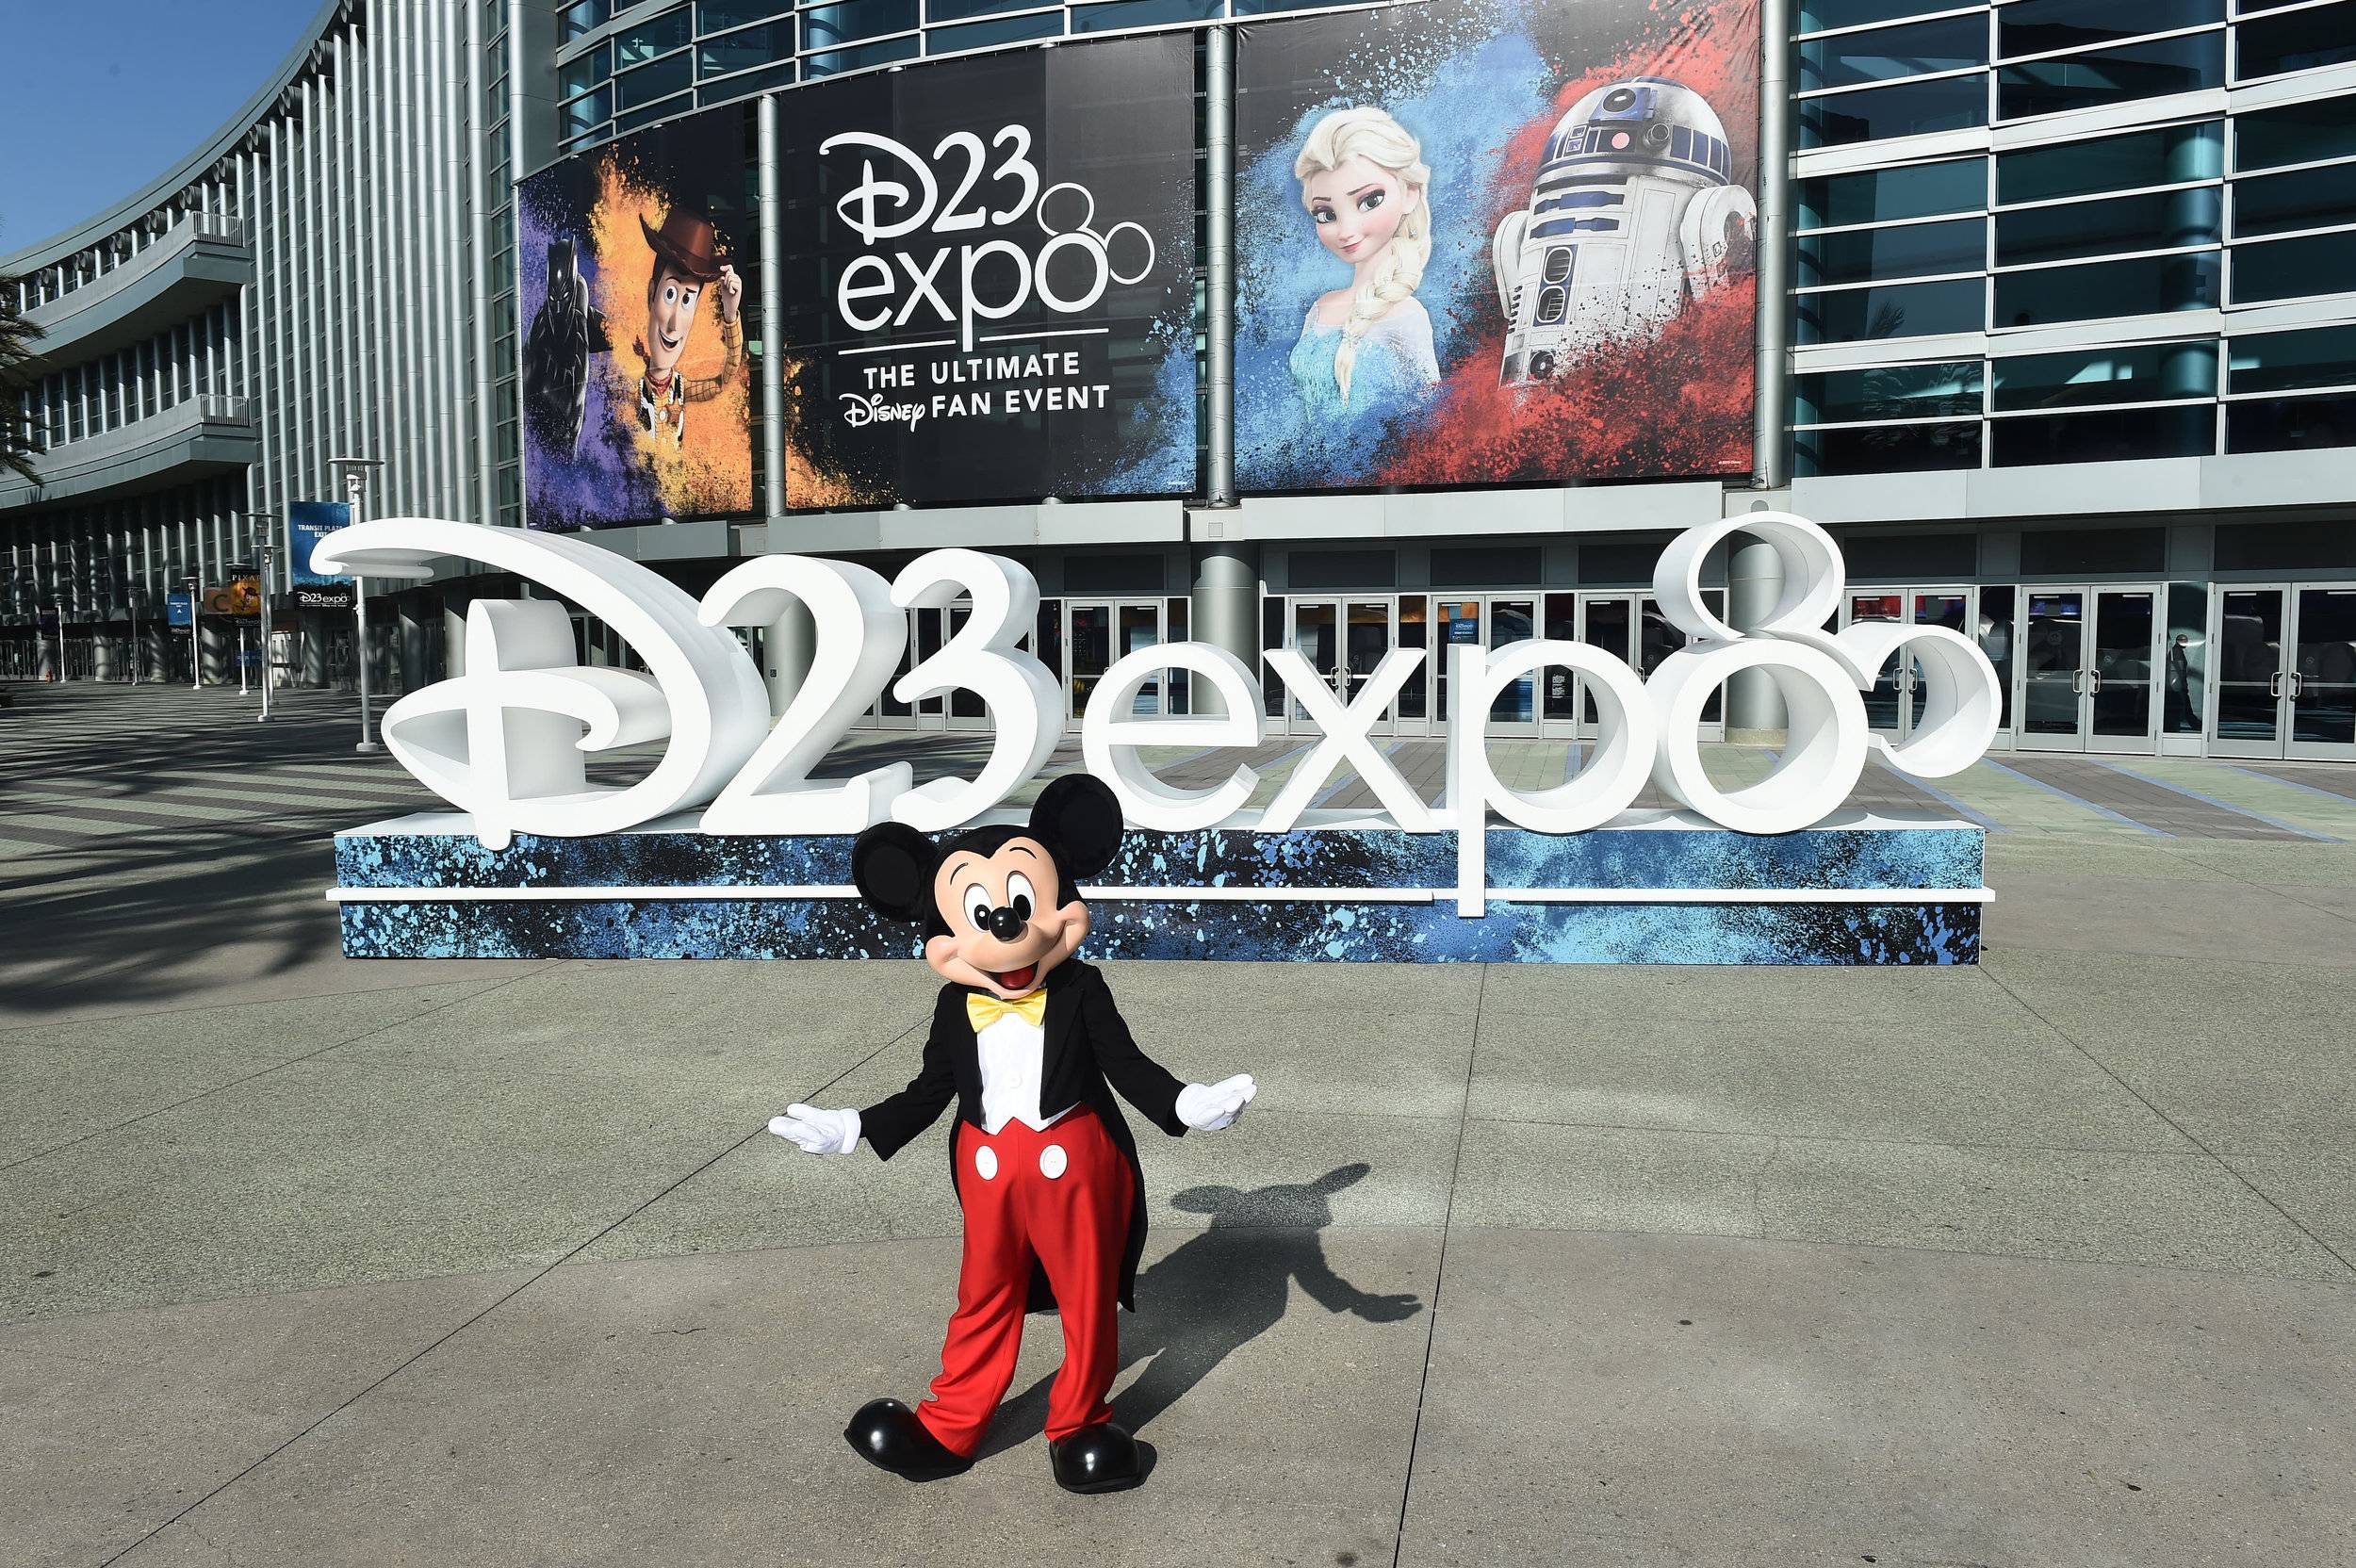 'Destination D23' dates announced for the 2023 event at Walt Disney World which will include 'exciting announcements'